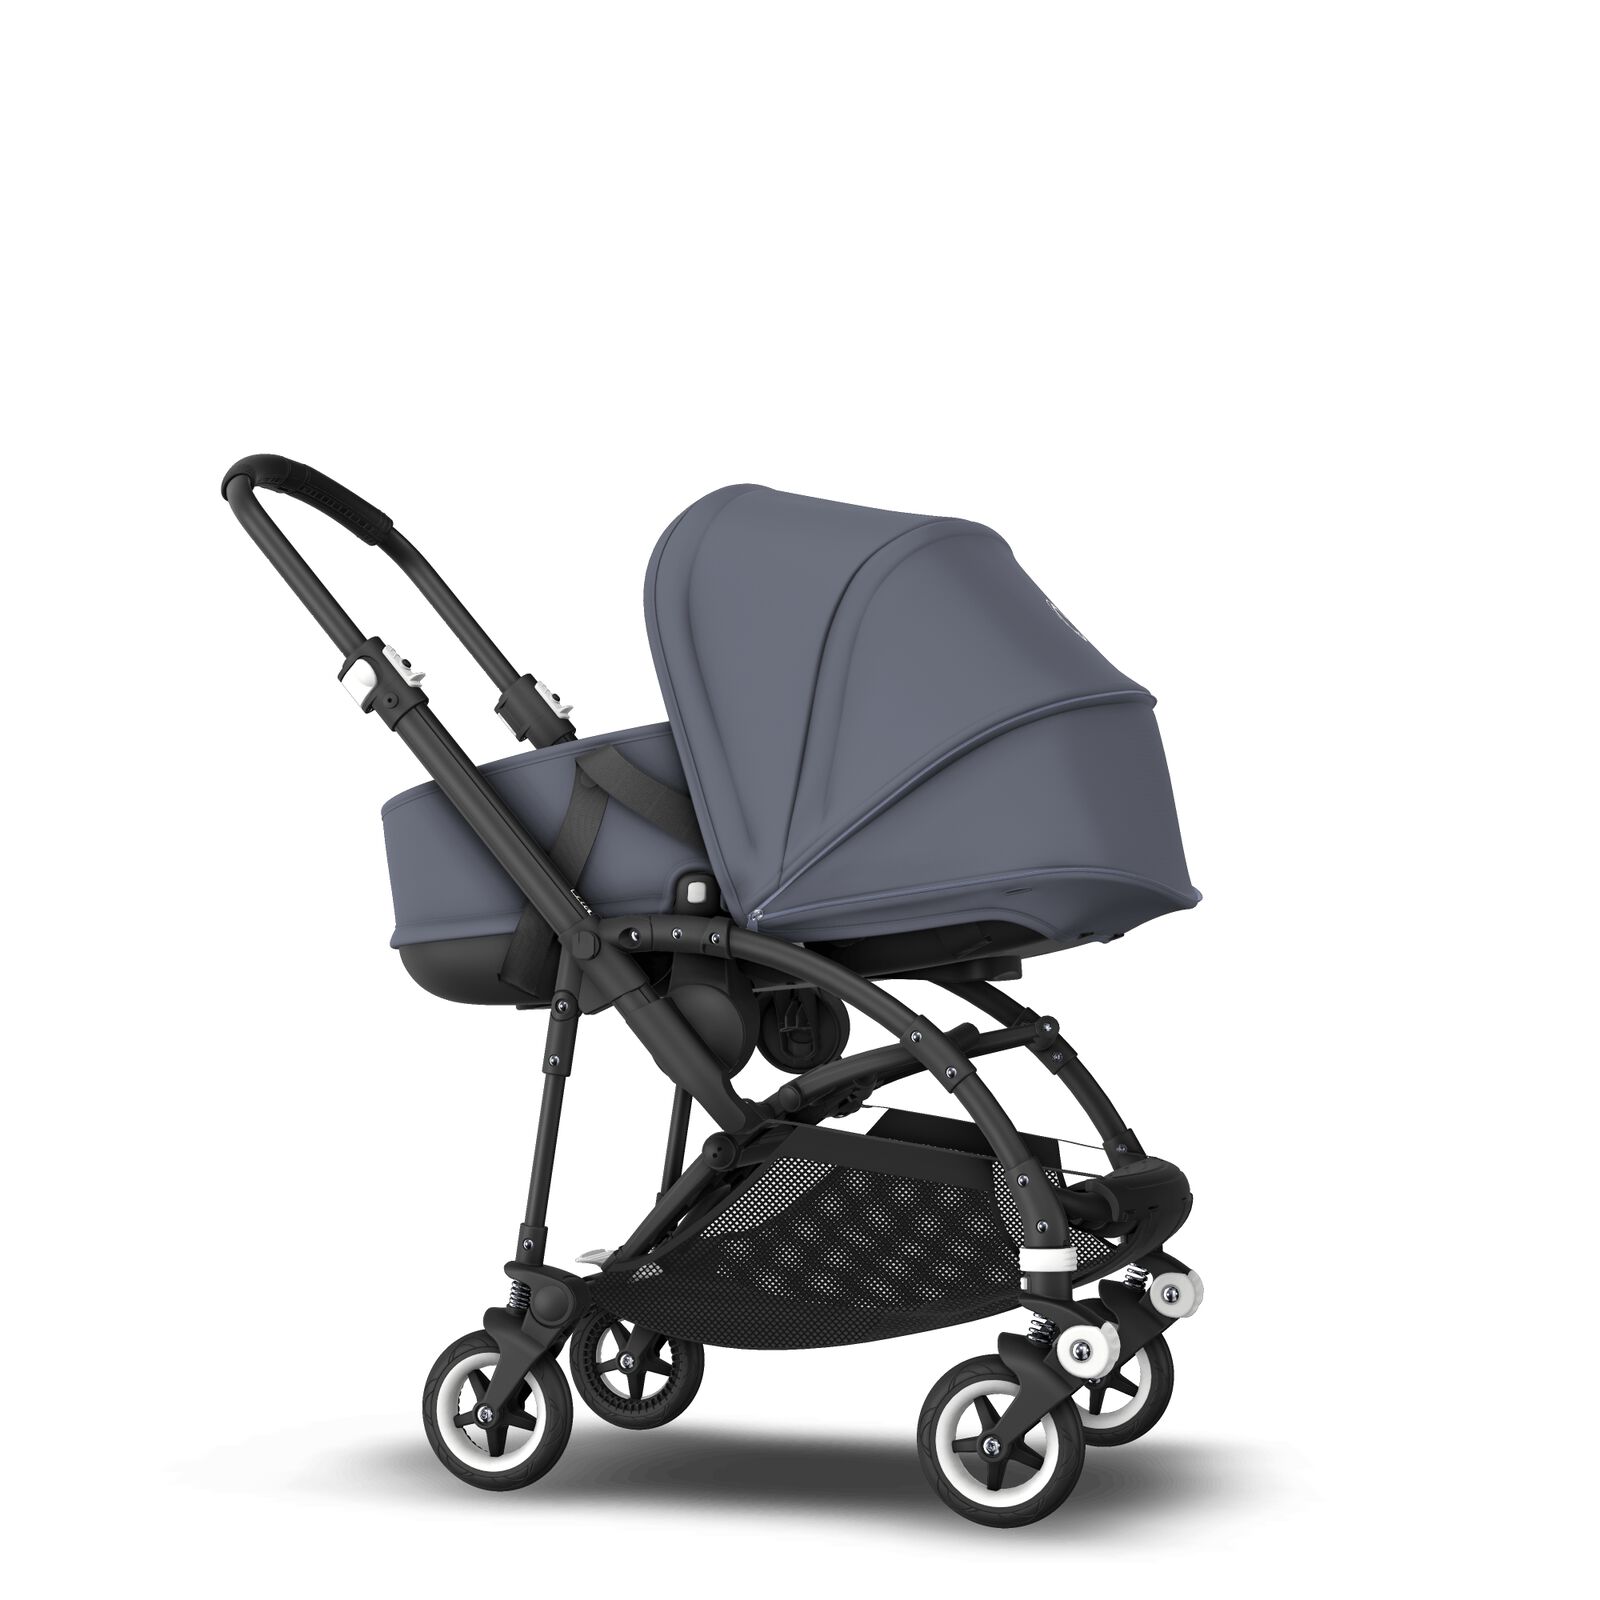 Bugaboo Bee 5 seat and bassinet stroller